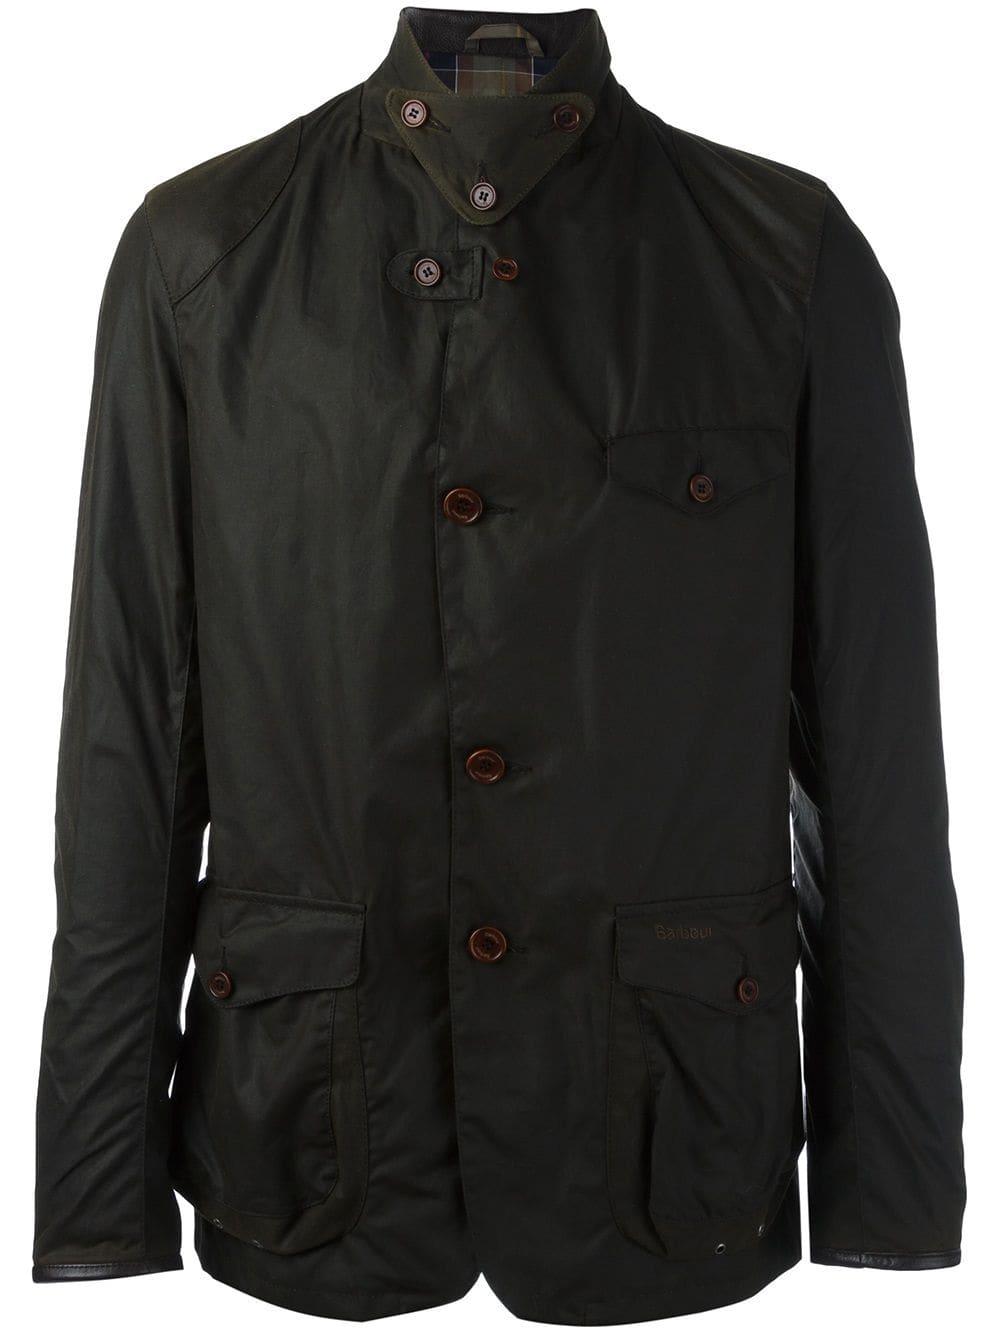 Barbour Cotton 'beacon' Jacket in Green for Men - Lyst